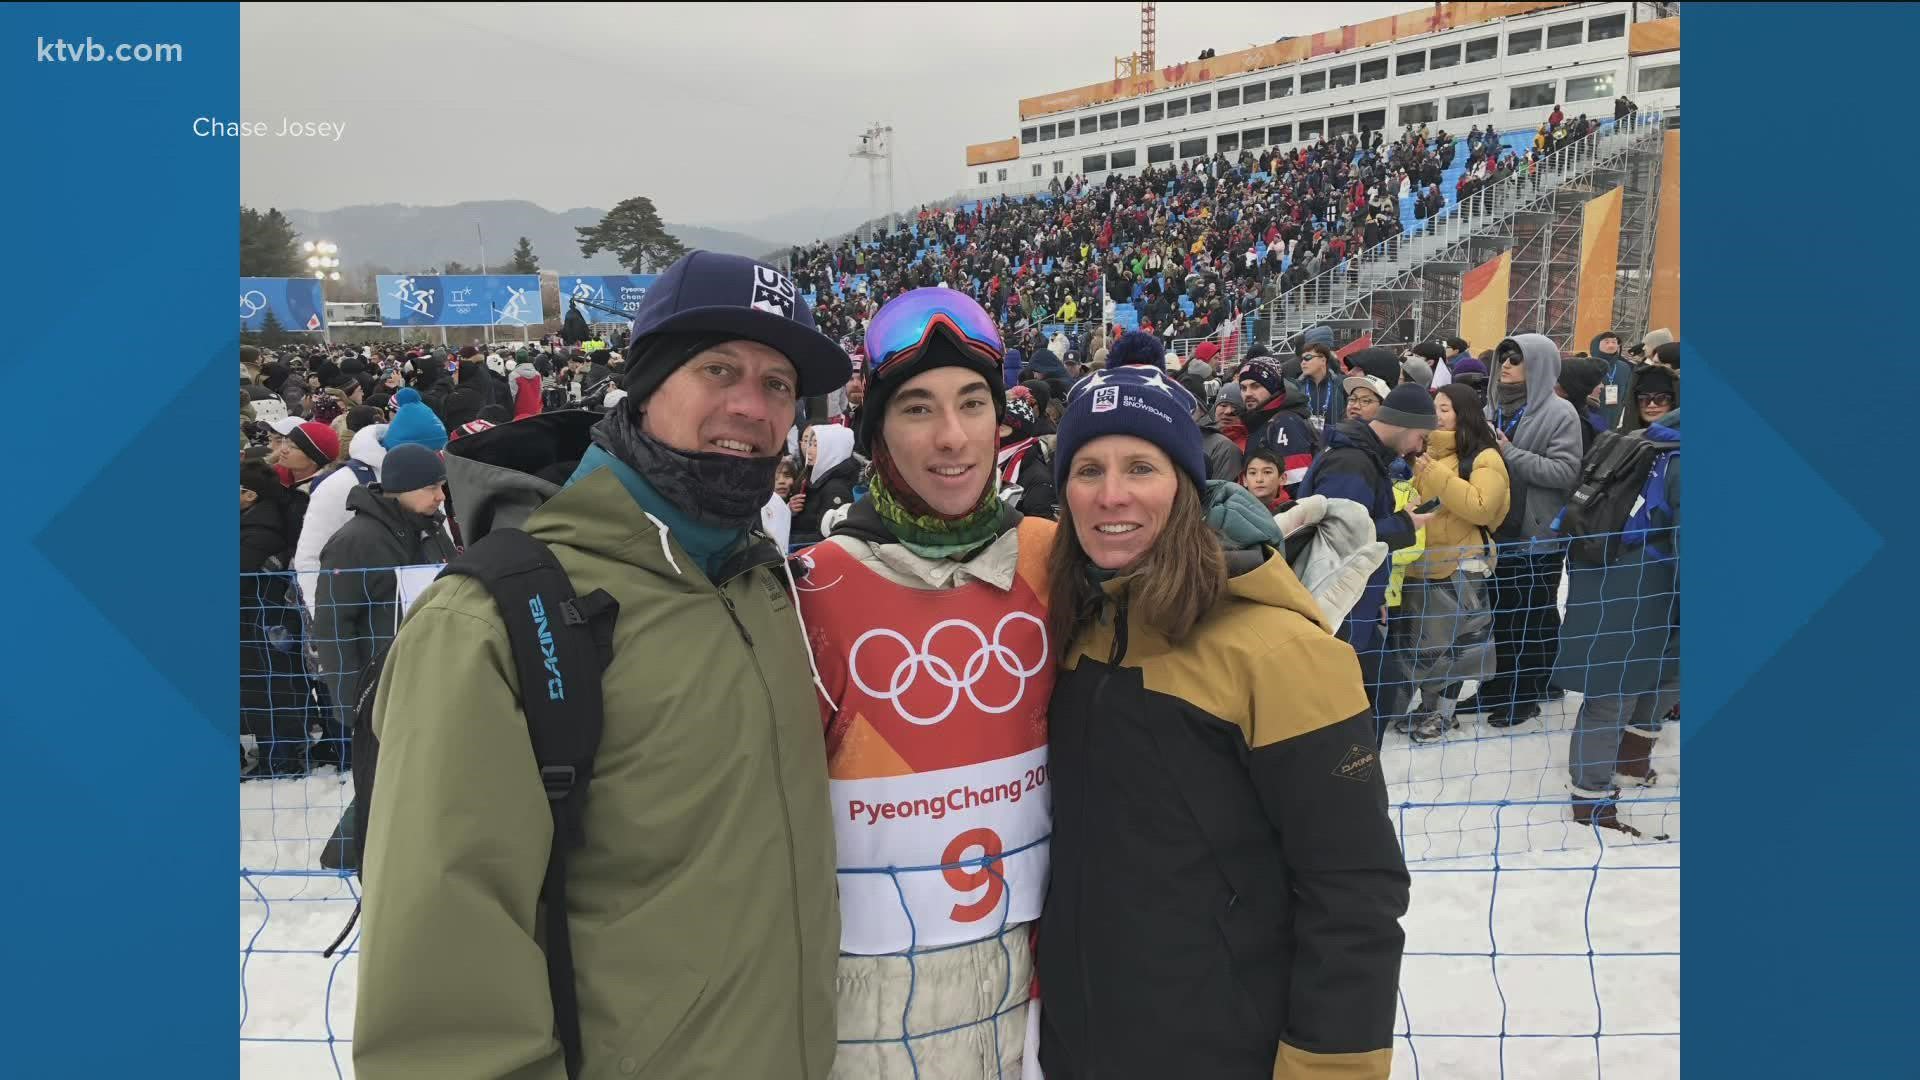 Kris and Bill Josey of Hailey, Idaho join KTVB to discuss Chase's journey from snowboarding in the 208 to representing Team USA at the 2022 Winter Olympics.